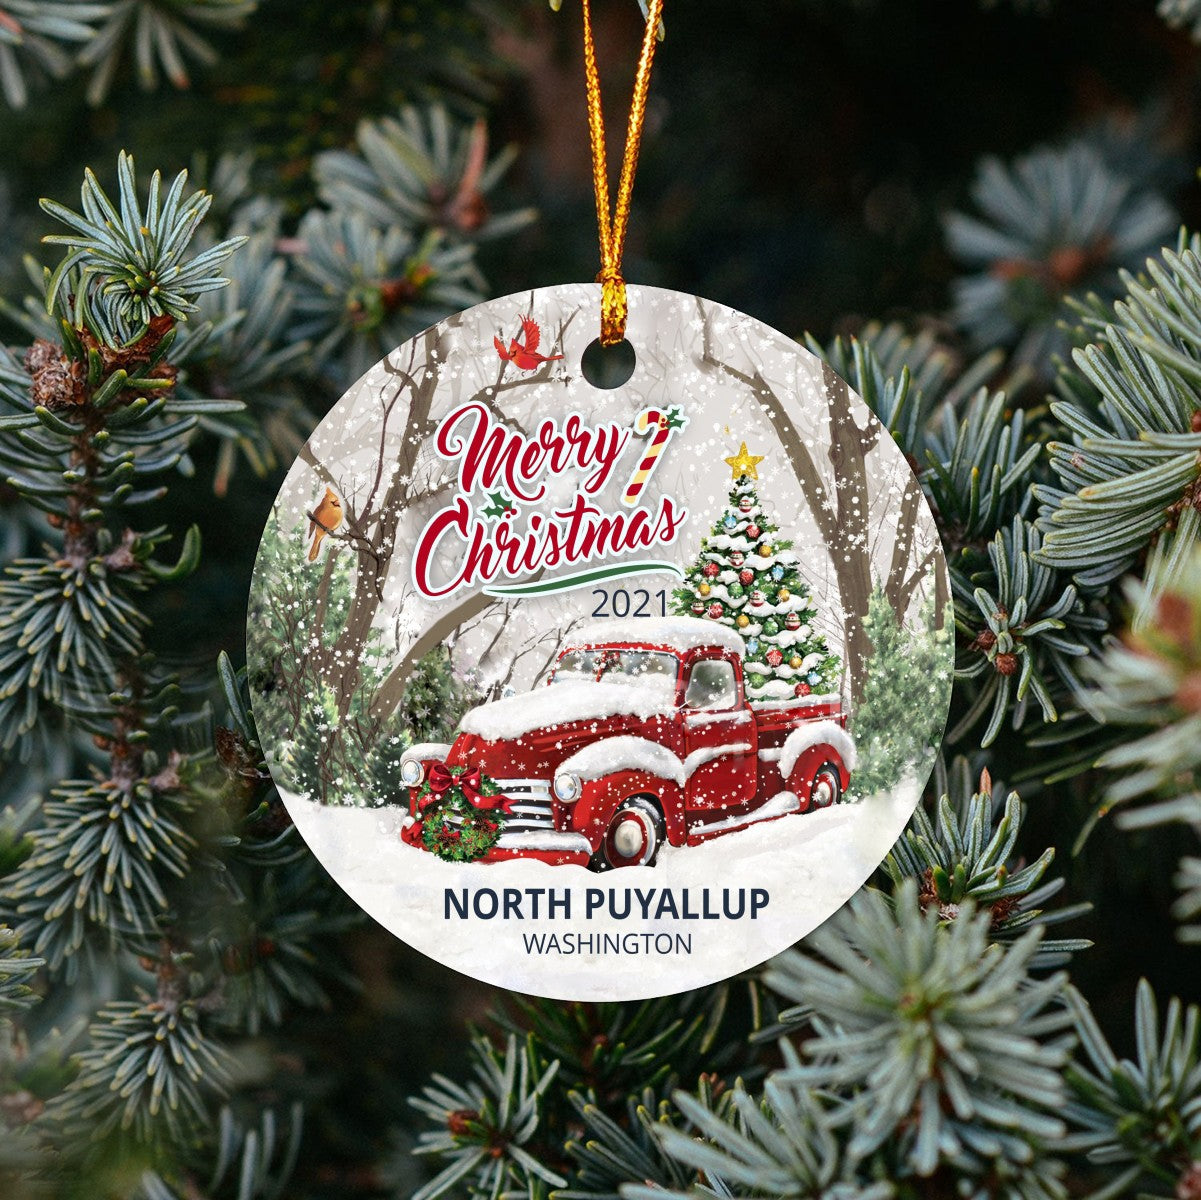 Christmas Tree Ornaments North Puyallup - Ornament With Name City, State North Puyallup Washington WA Ornament - Red Truck Xmas Ornaments 3'' Plastic Gift For Family, Friend And Housewarming